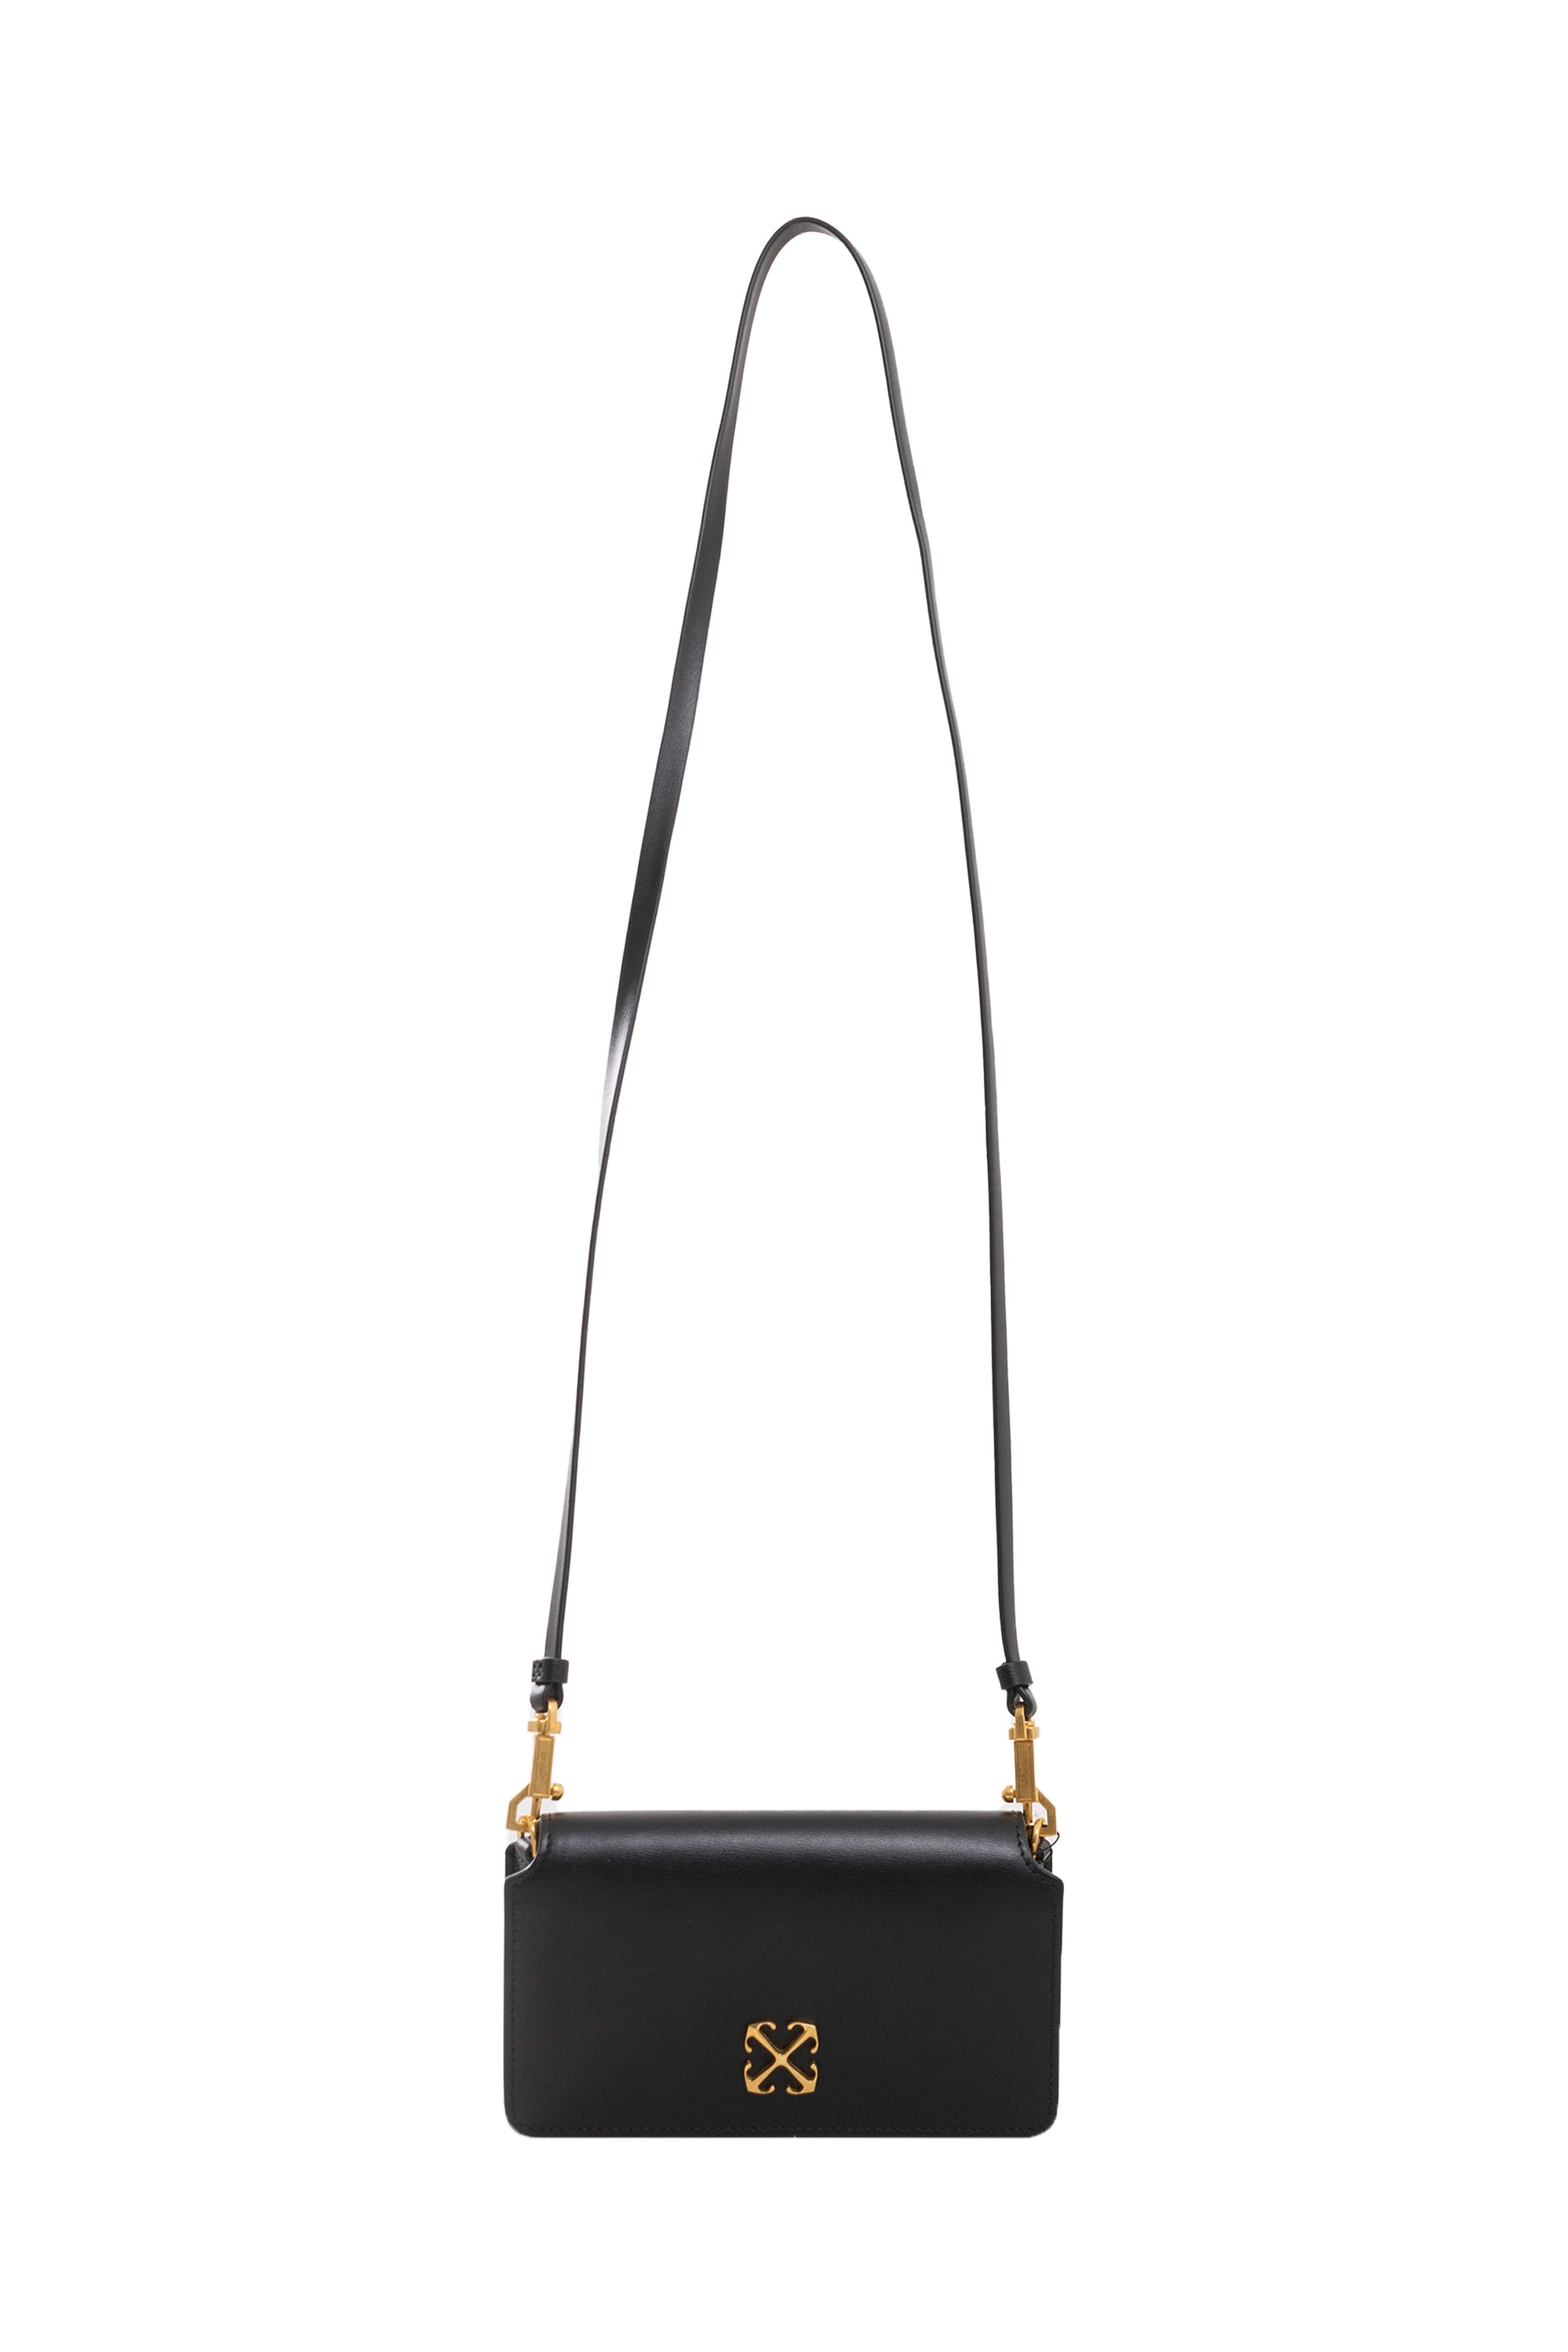 GUESS Hassie Frame Crossbody